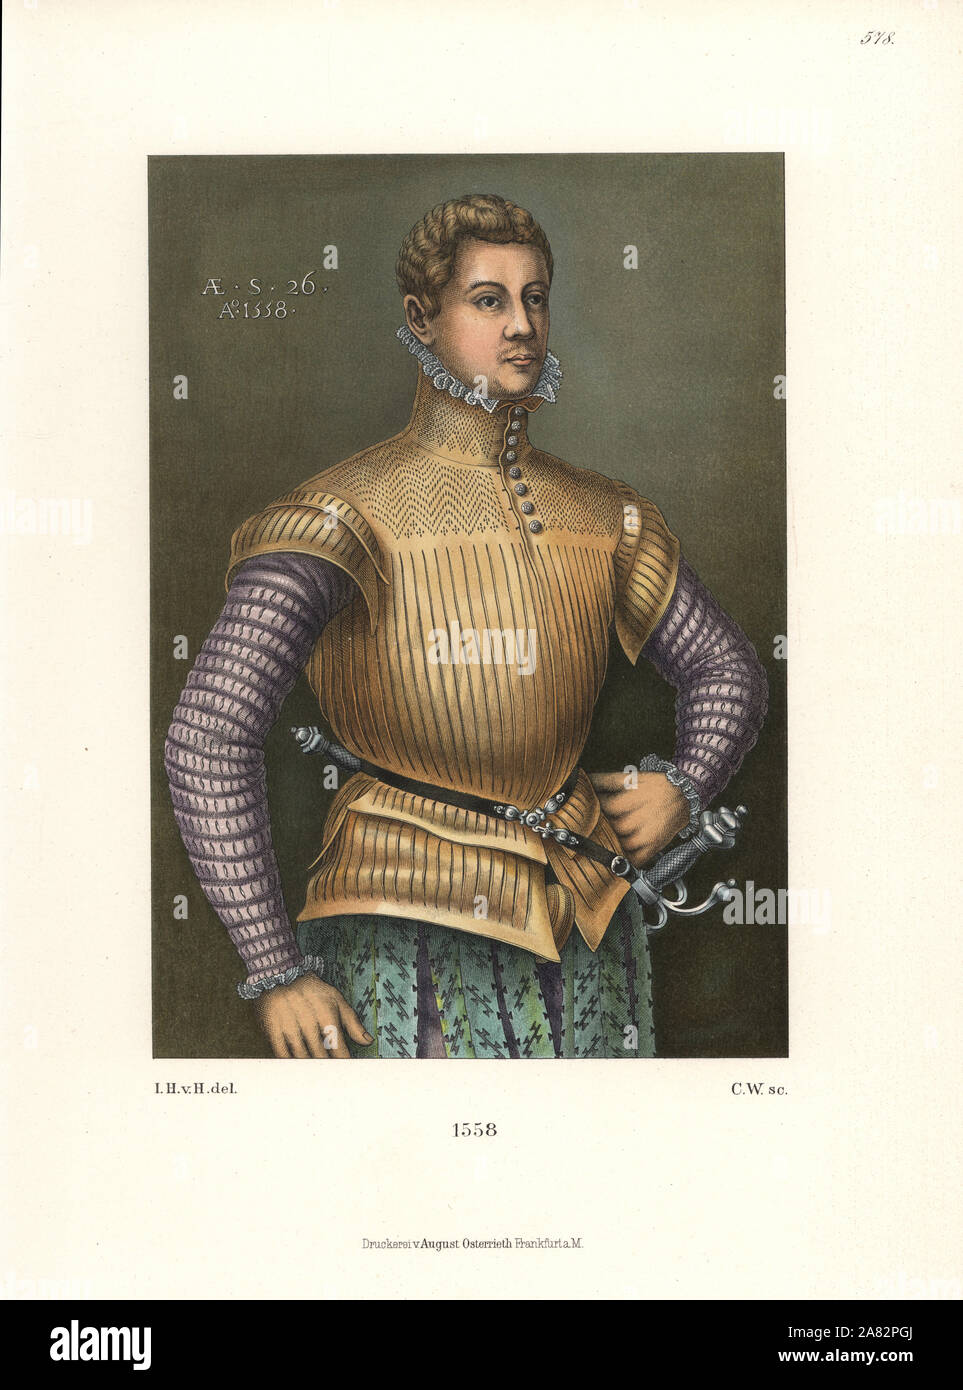 Portrait of a young man after an oil painting in Hollenzollern Castle, Zigmaringen, 1558. The deer leather jacket, silk sleeves and trousers are decorated with fine slits and points. Chromolithograph from Hefner-Alteneck's Costumes, Artworks and Appliances from the Middle Ages to the 17th Century, Frankfurt, 1889. Illustration by Dr. Jakob Heinrich von Hefner-Alteneck, lithographed by C. W. Dr. Hefner-Alteneck (1811-1903) was a German museum curator, archaeologist, art historian, illustrator and etcher. Stock Photo